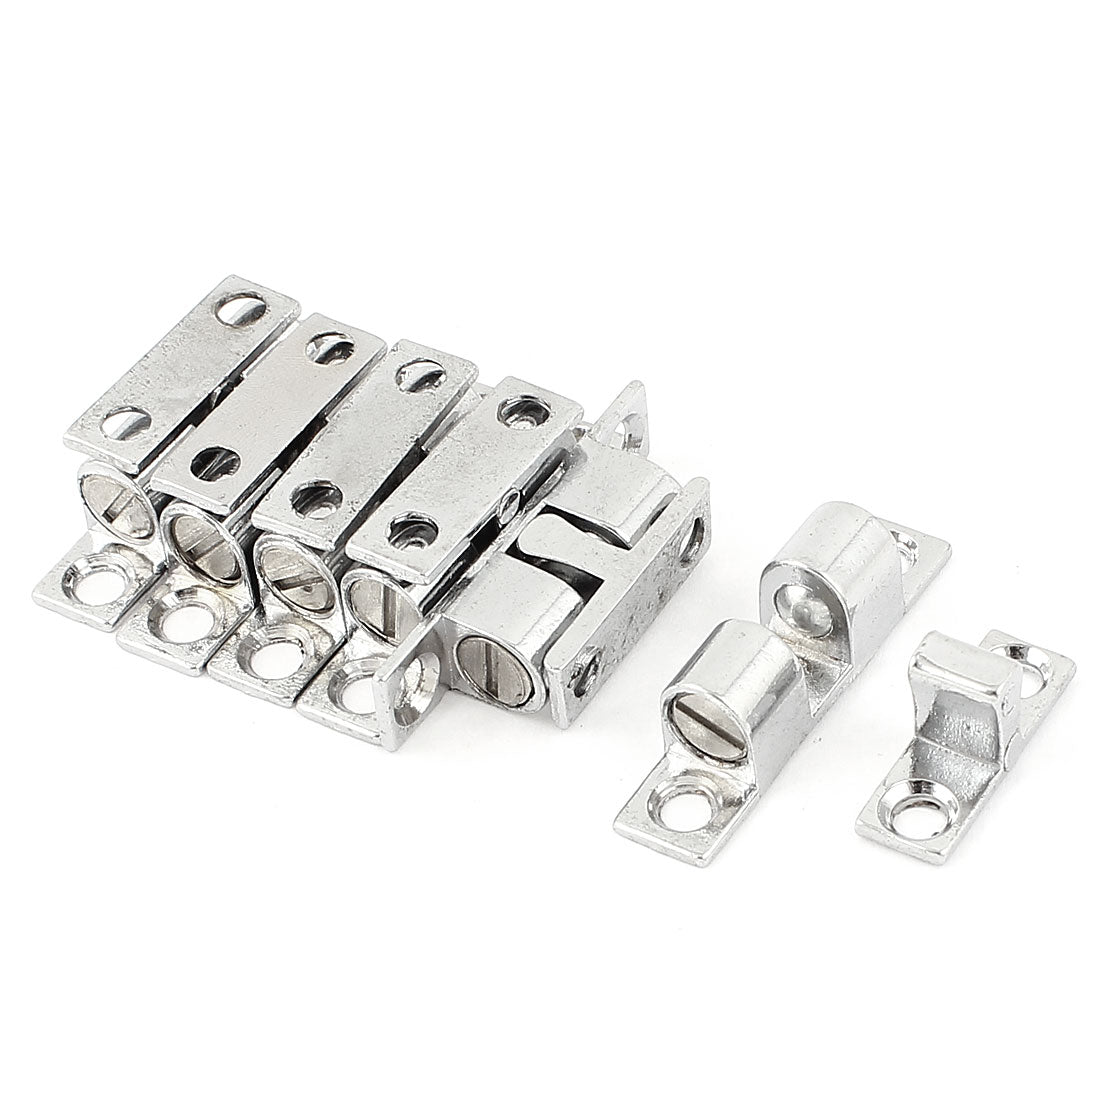 uxcell Uxcell Furniture Fitting Alloy Cabinet Door Double Ball Roller Catch 6 Pcs